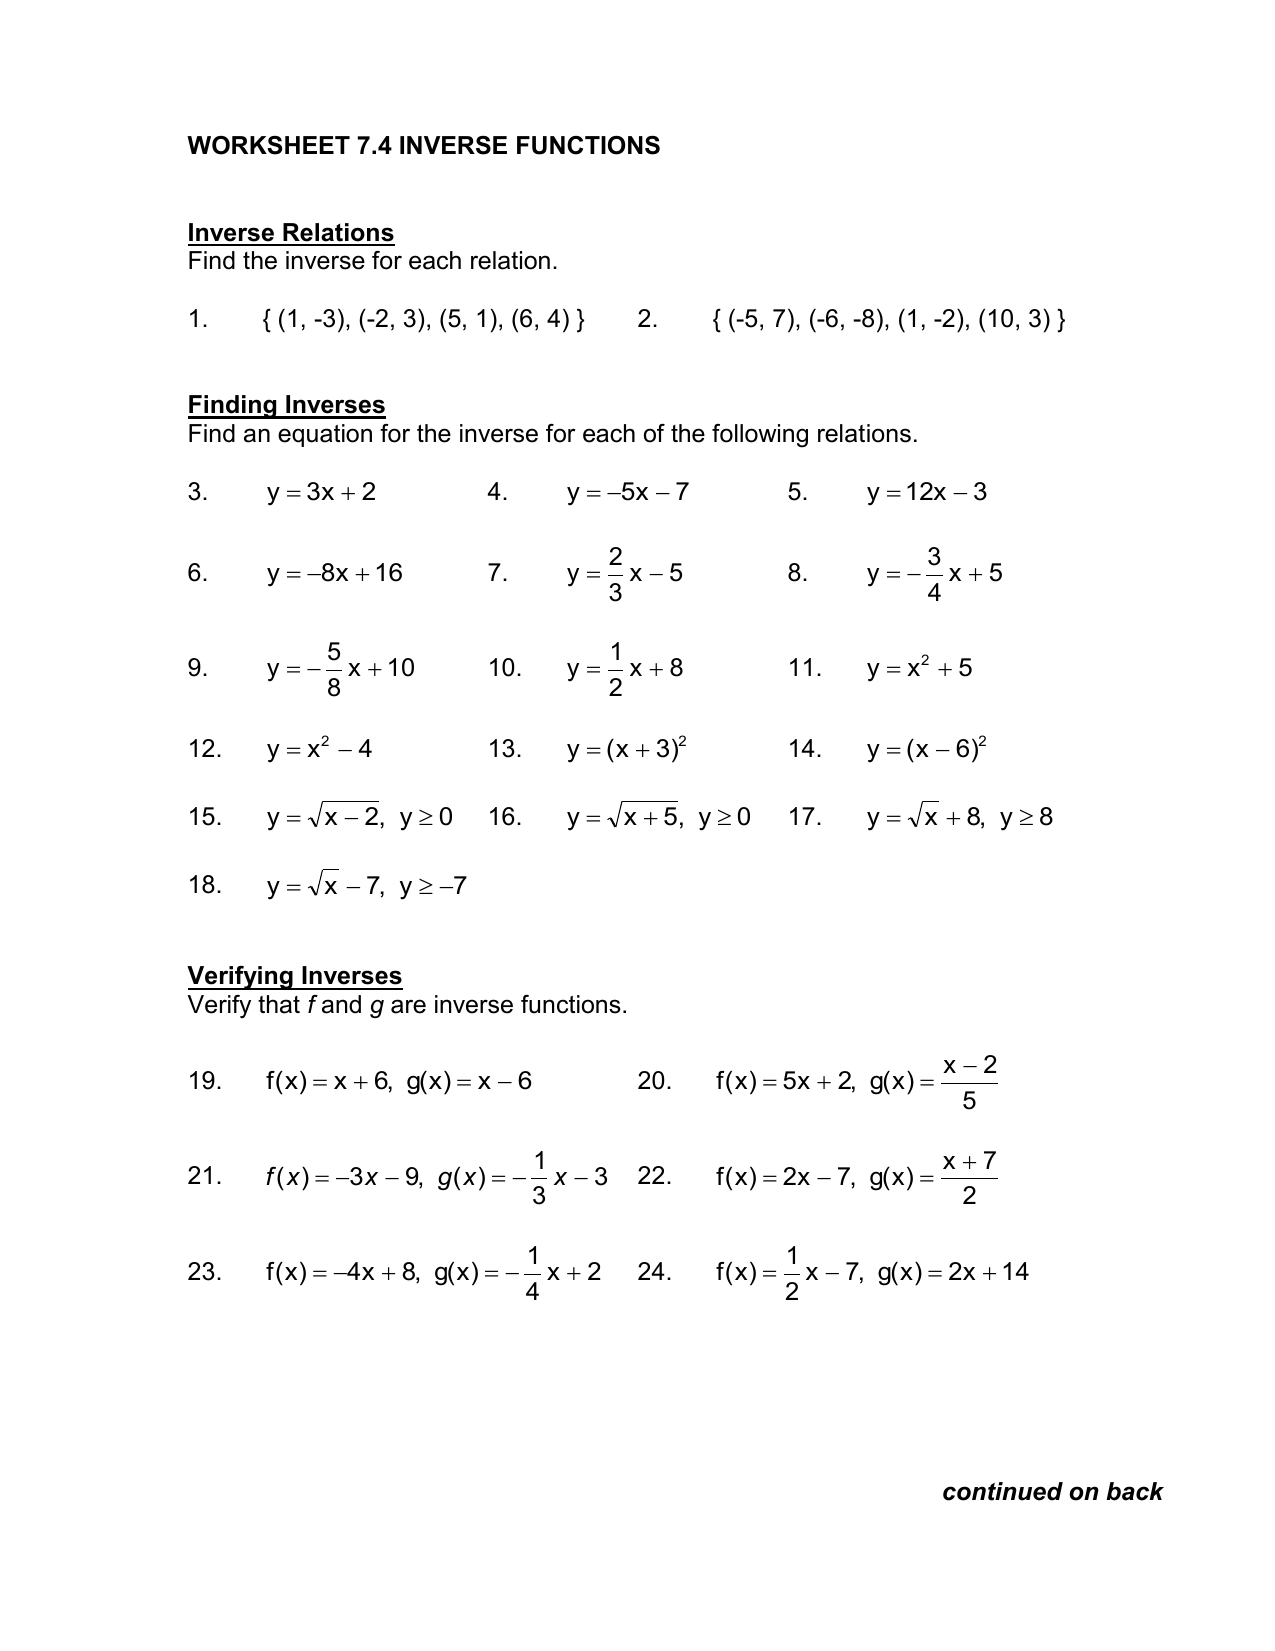 worksheet 22 22 inverse functions Within Graphing Inverse Functions Worksheet